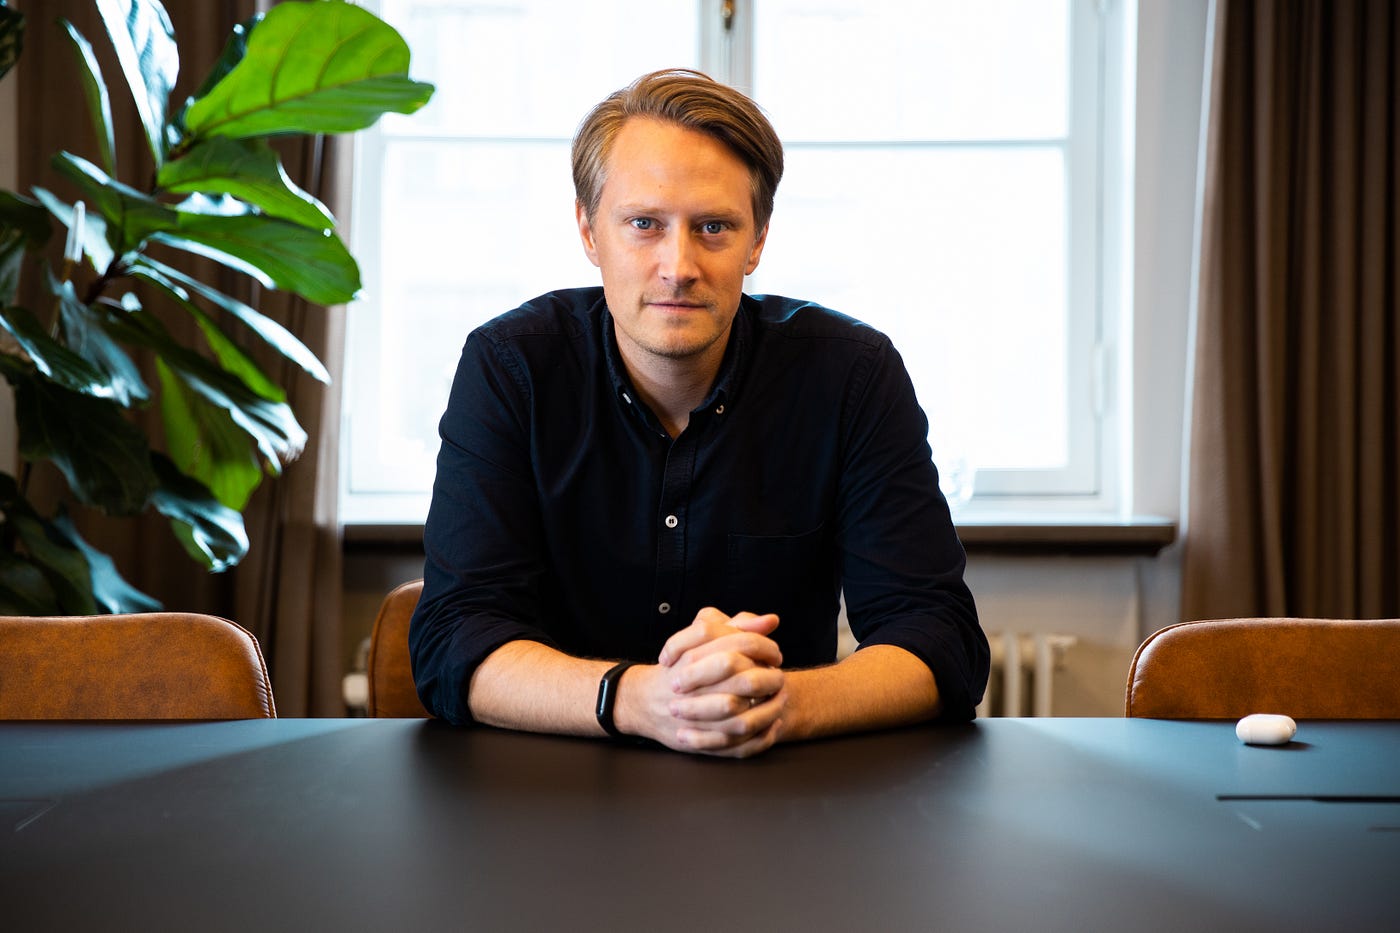 Acast founder Johan Billgren on podcasting success // Part II: Growth and  monetization | by Acast: For The Stories. | Acast | Medium